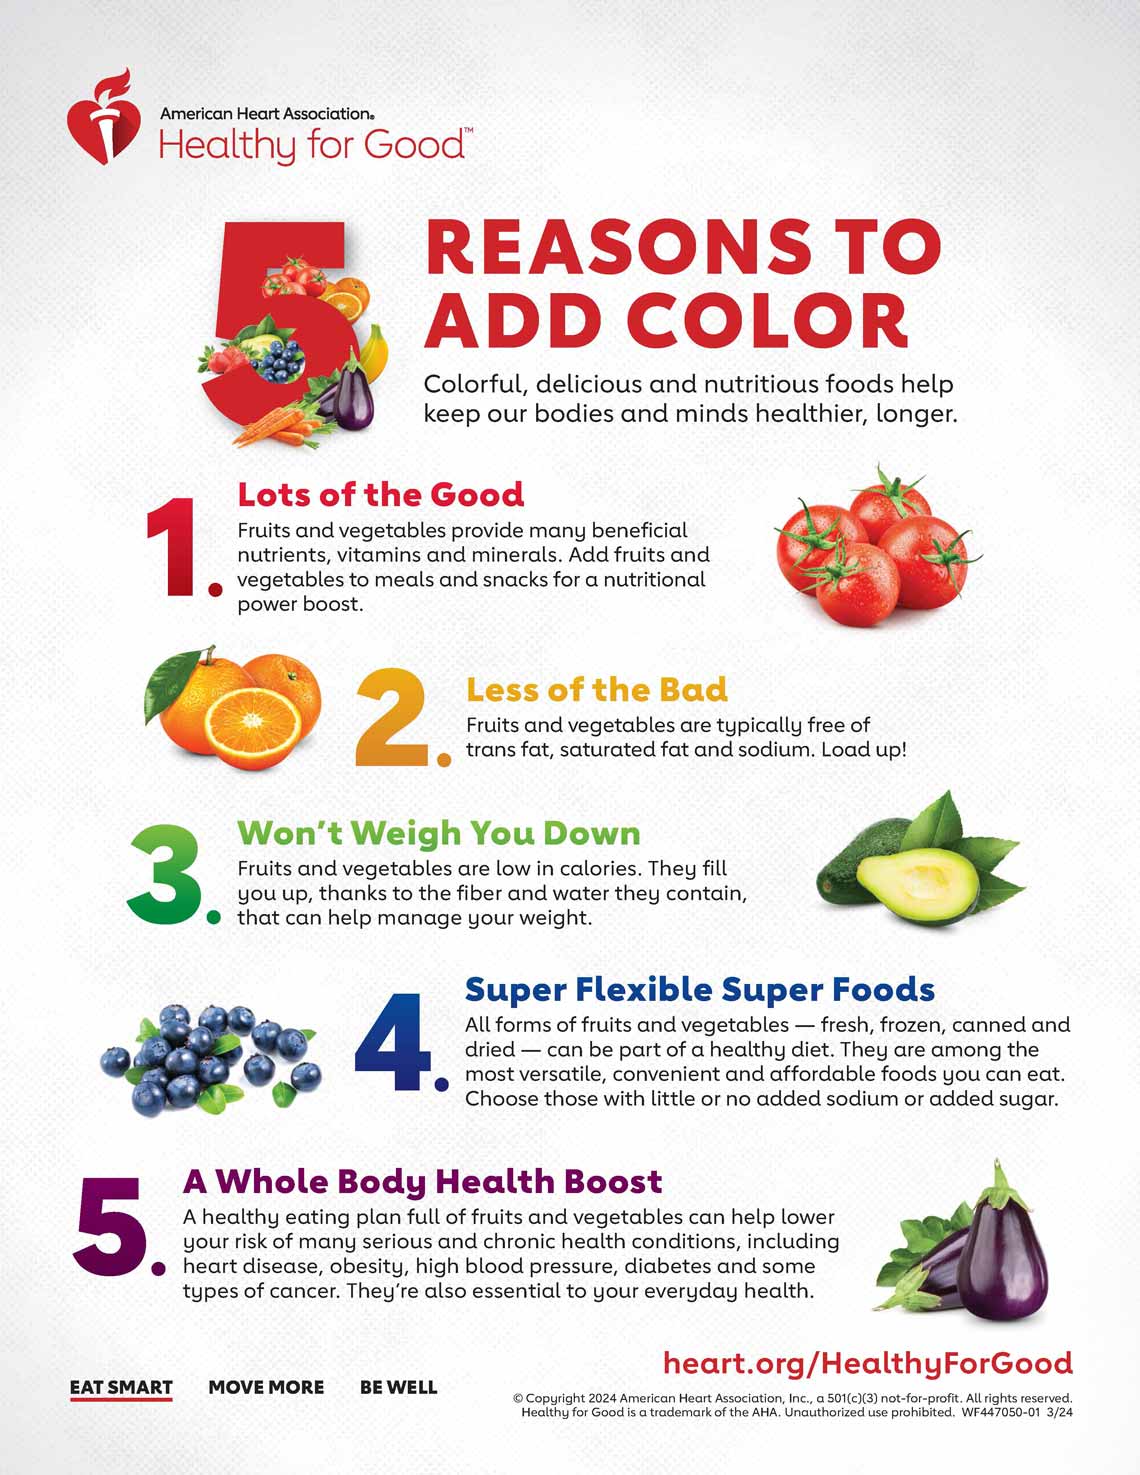 5 Reasons to Add Color infographic